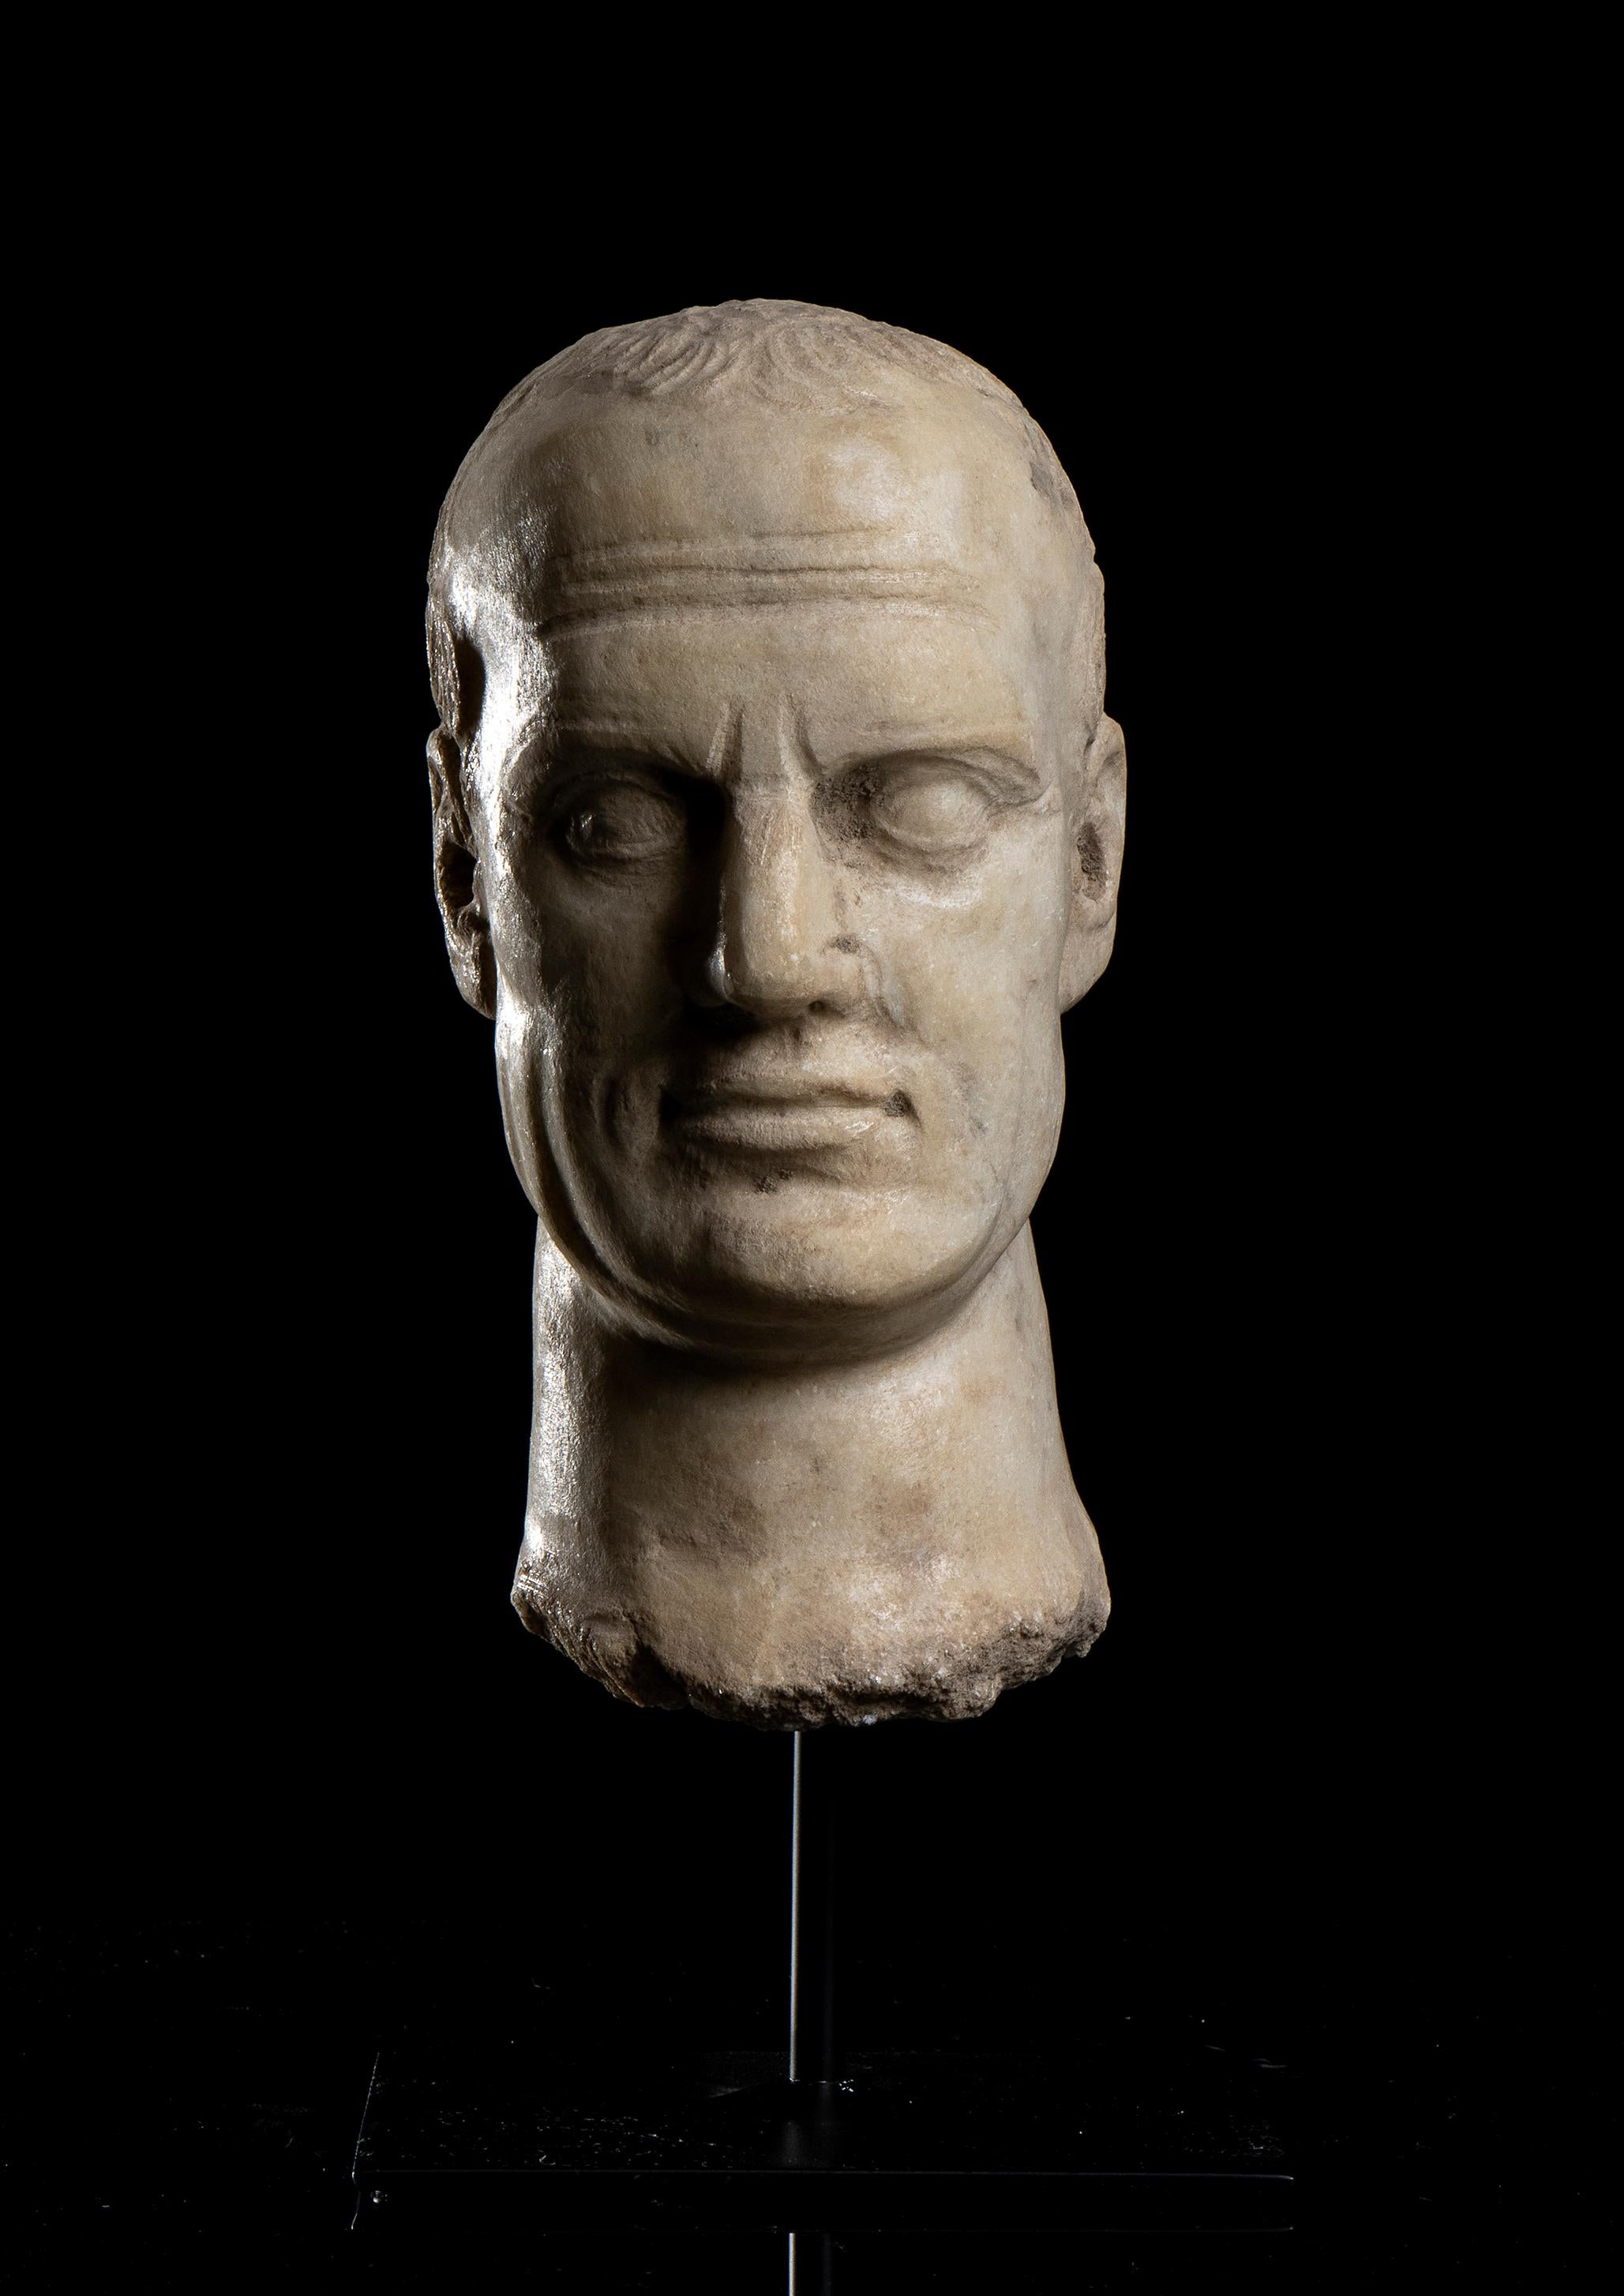 The head of Jiulis Caesar stand on a central pin on a squared base in black metal in an archeological grand tour style, classical Roman carved in white statuary marble aged.
Gaius Julius Caesar  was the most important and influent  Roman general and